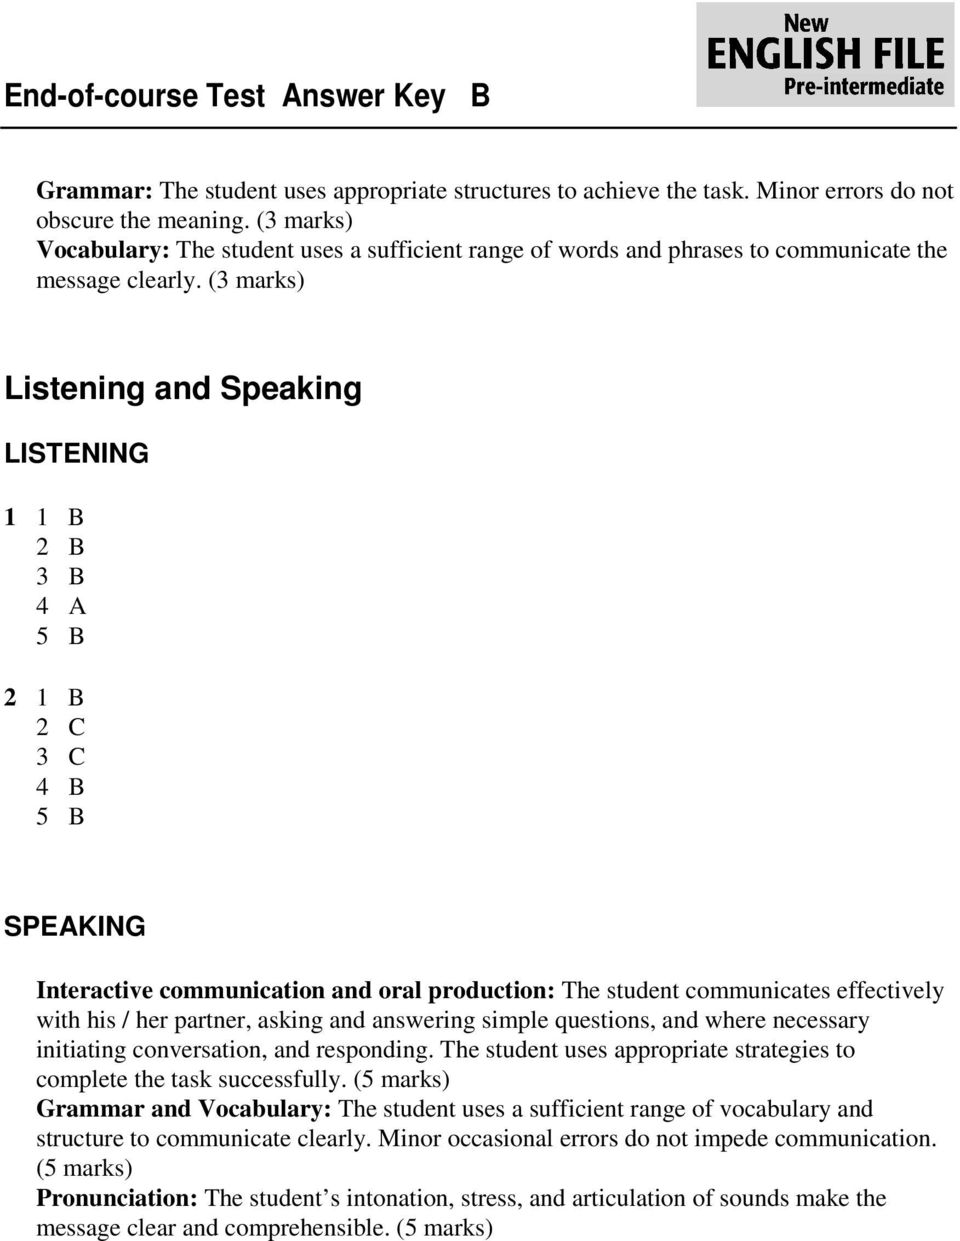 (3 marks) Listening and Speaking LISTENING 1 1 B 2 B 3 B 4 A 5 B 2 1 B 2 C 3 C 4 B 5 B SPEAKING Interactive communication and oral production: The student communicates effectively with his / her